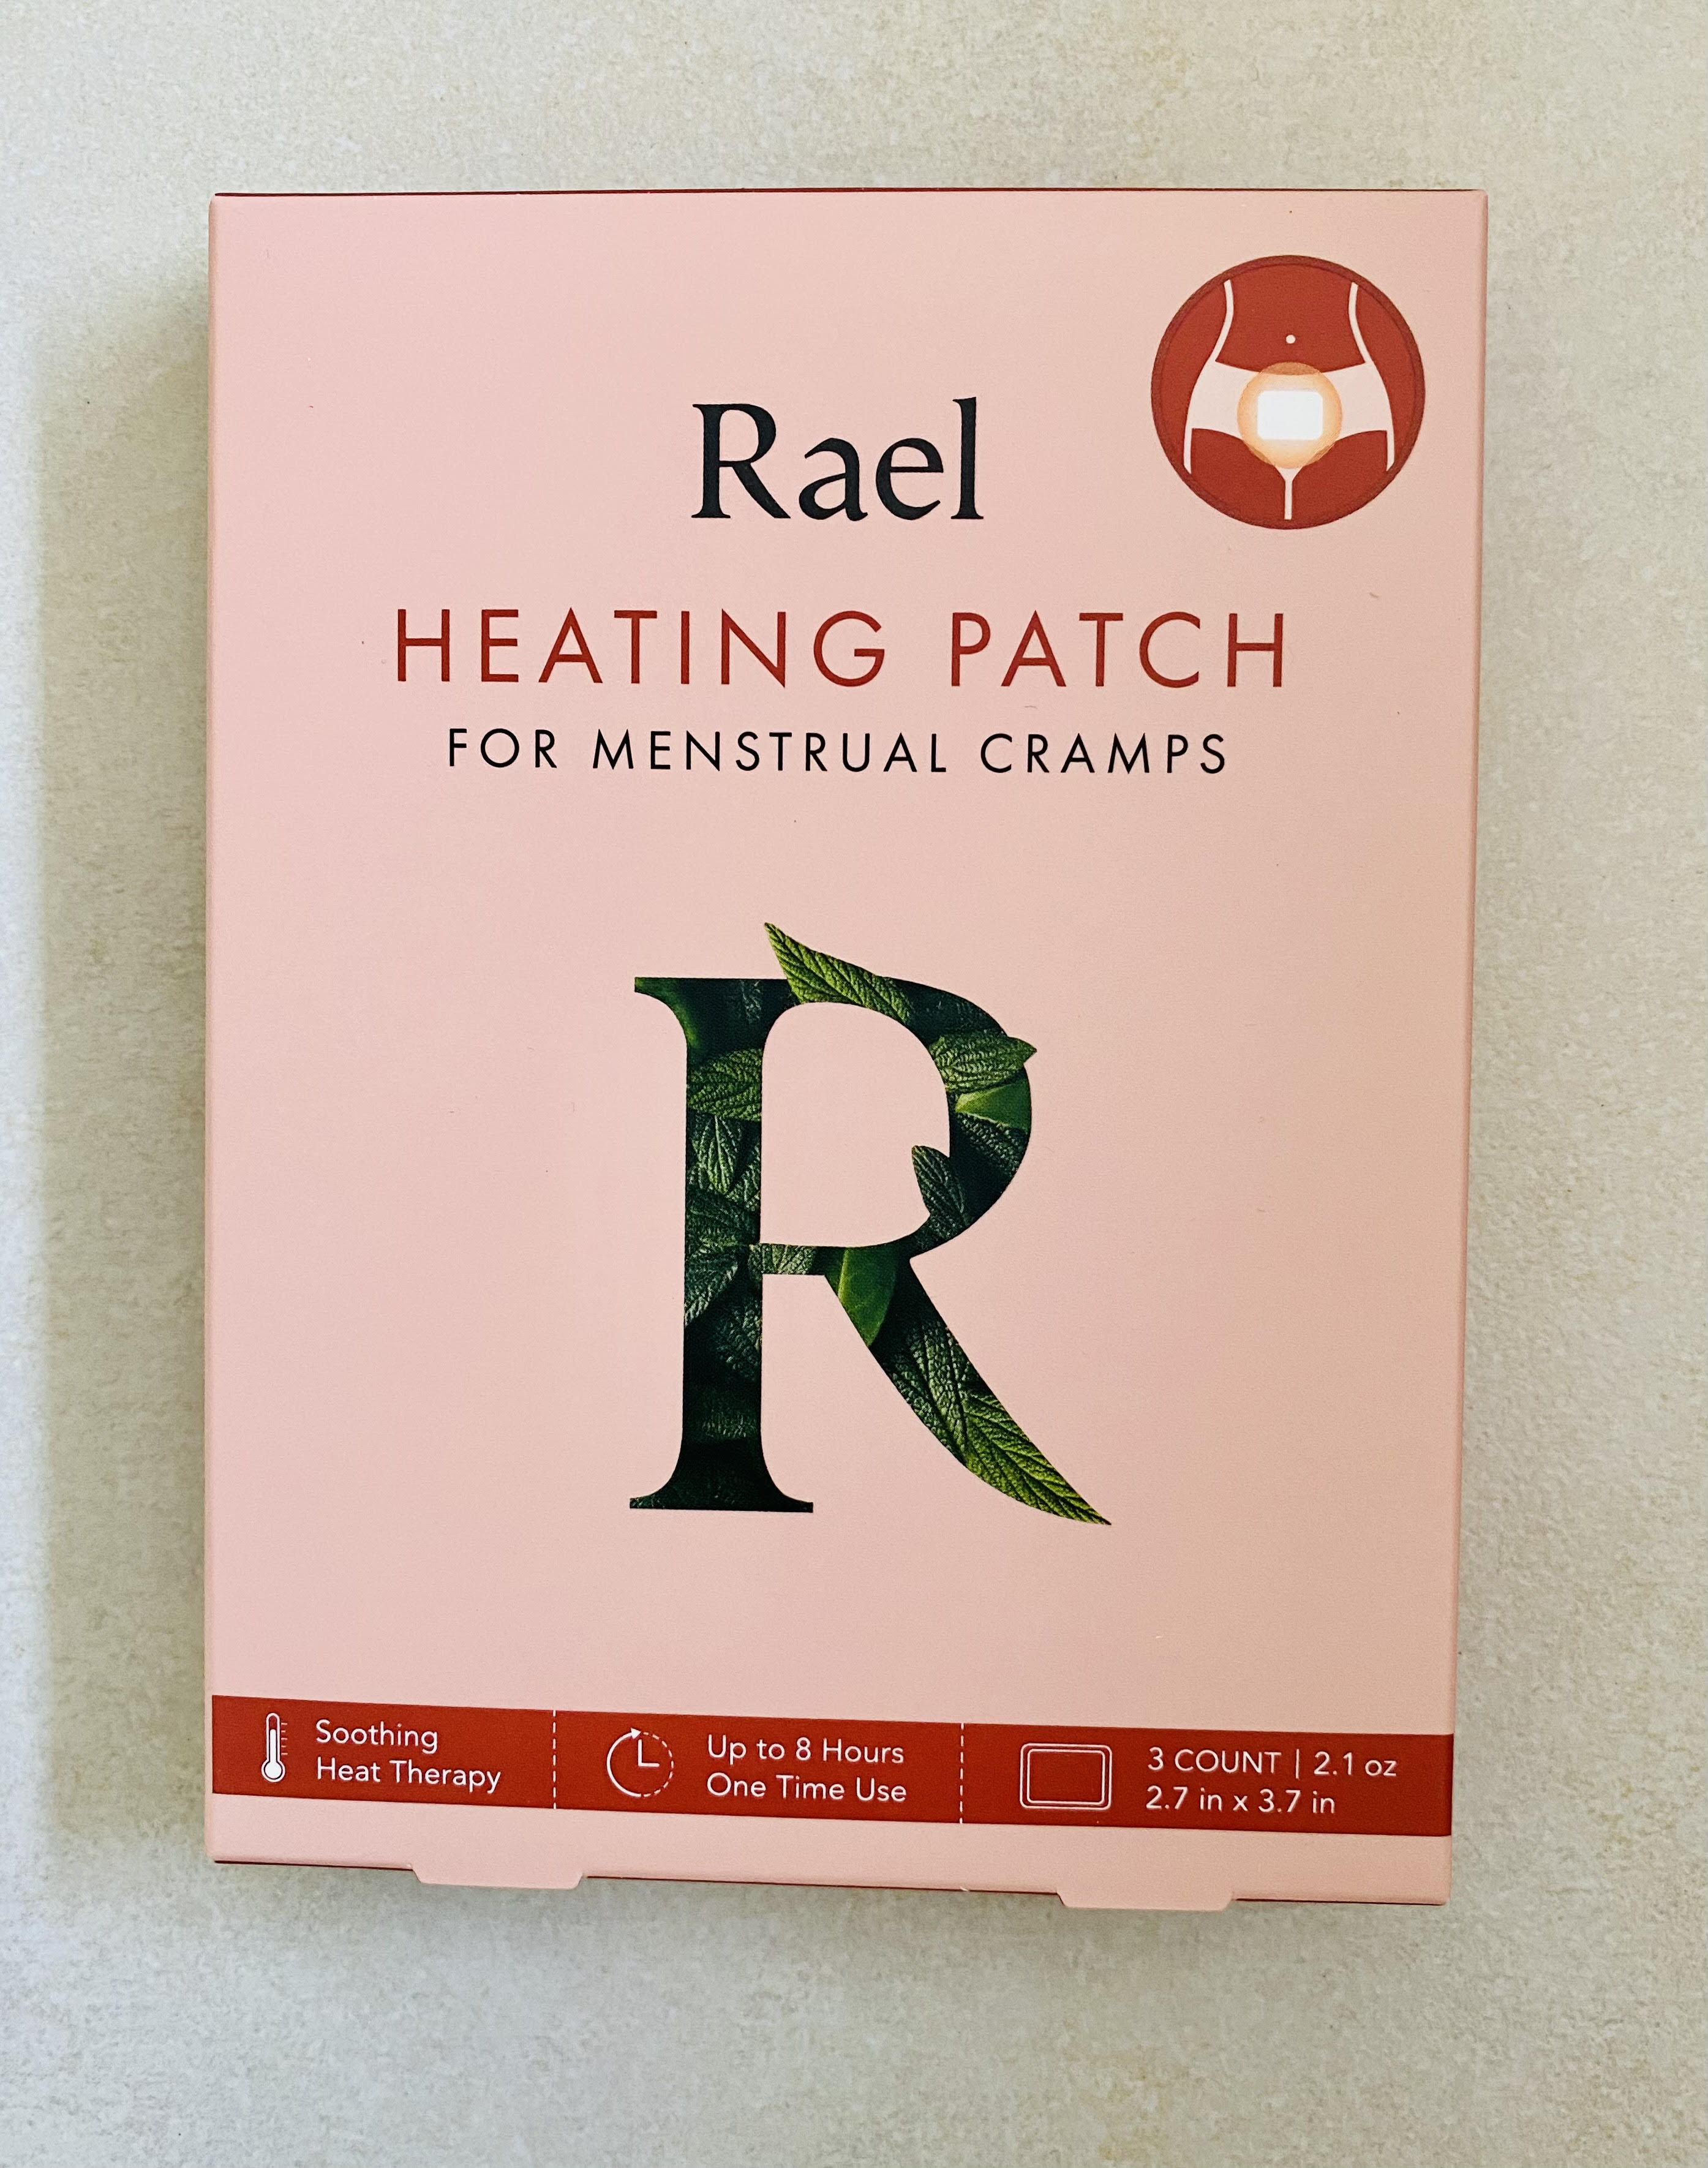 Rael Natural Herbal Heating Patches For relief from Menstrual Cramps BEST SELLING IN USA